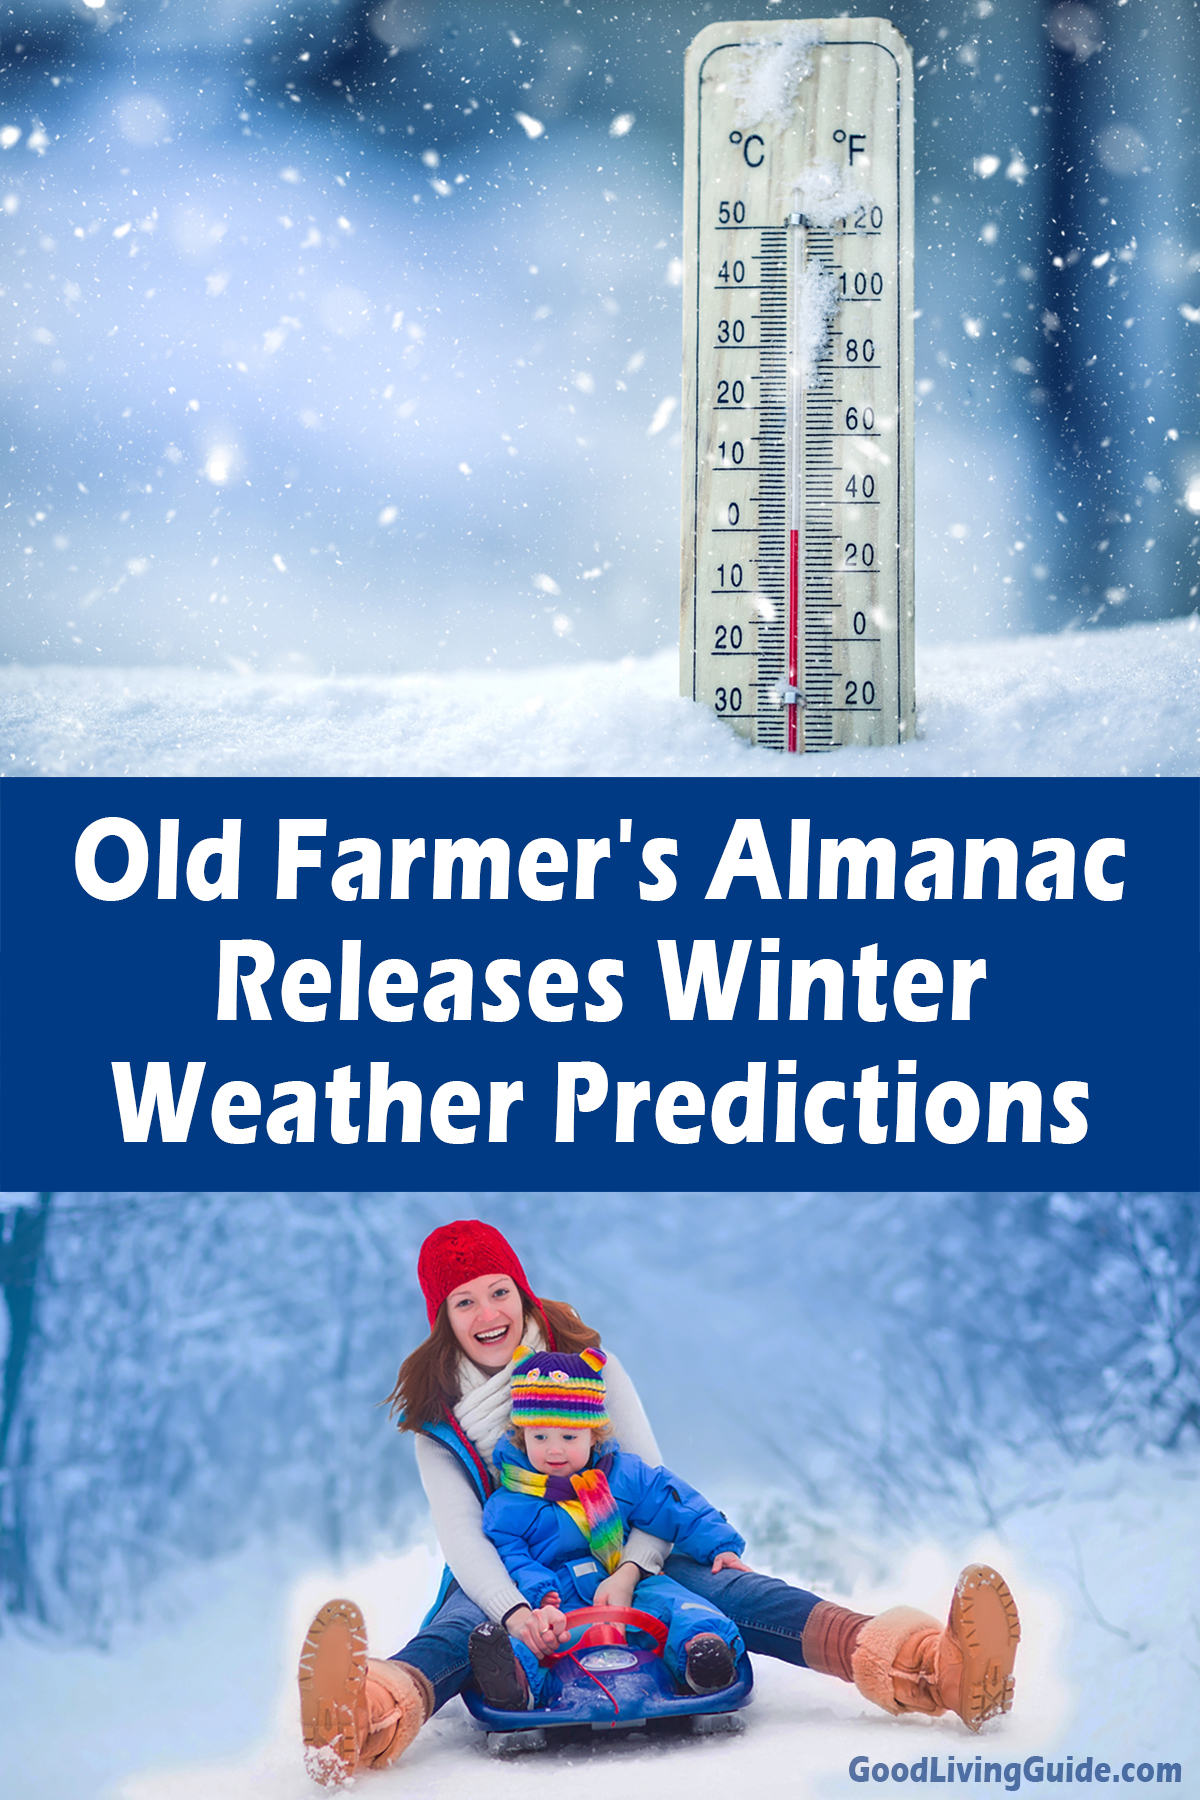 Old Farmer's Almanac Releases Winter Weather Predictions for 20232024